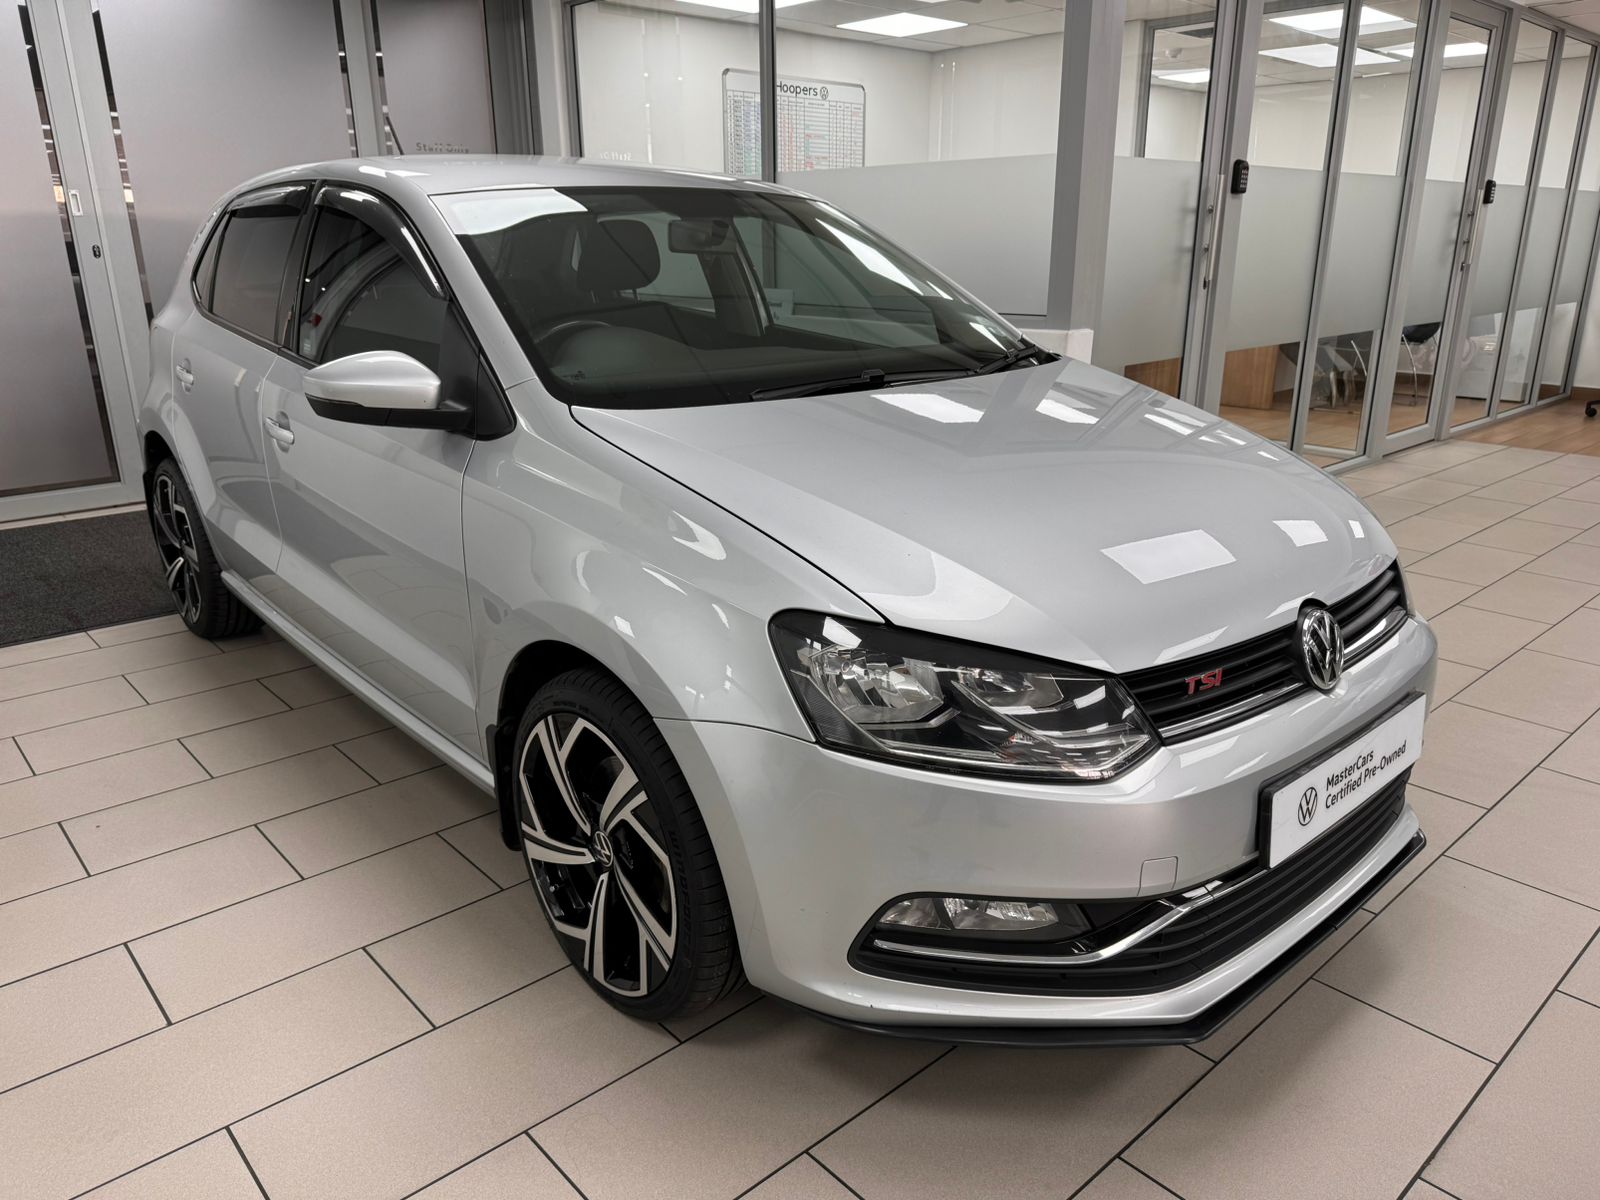 2016 Volkswagen Polo Hatch  for sale - 01HVUVW087485